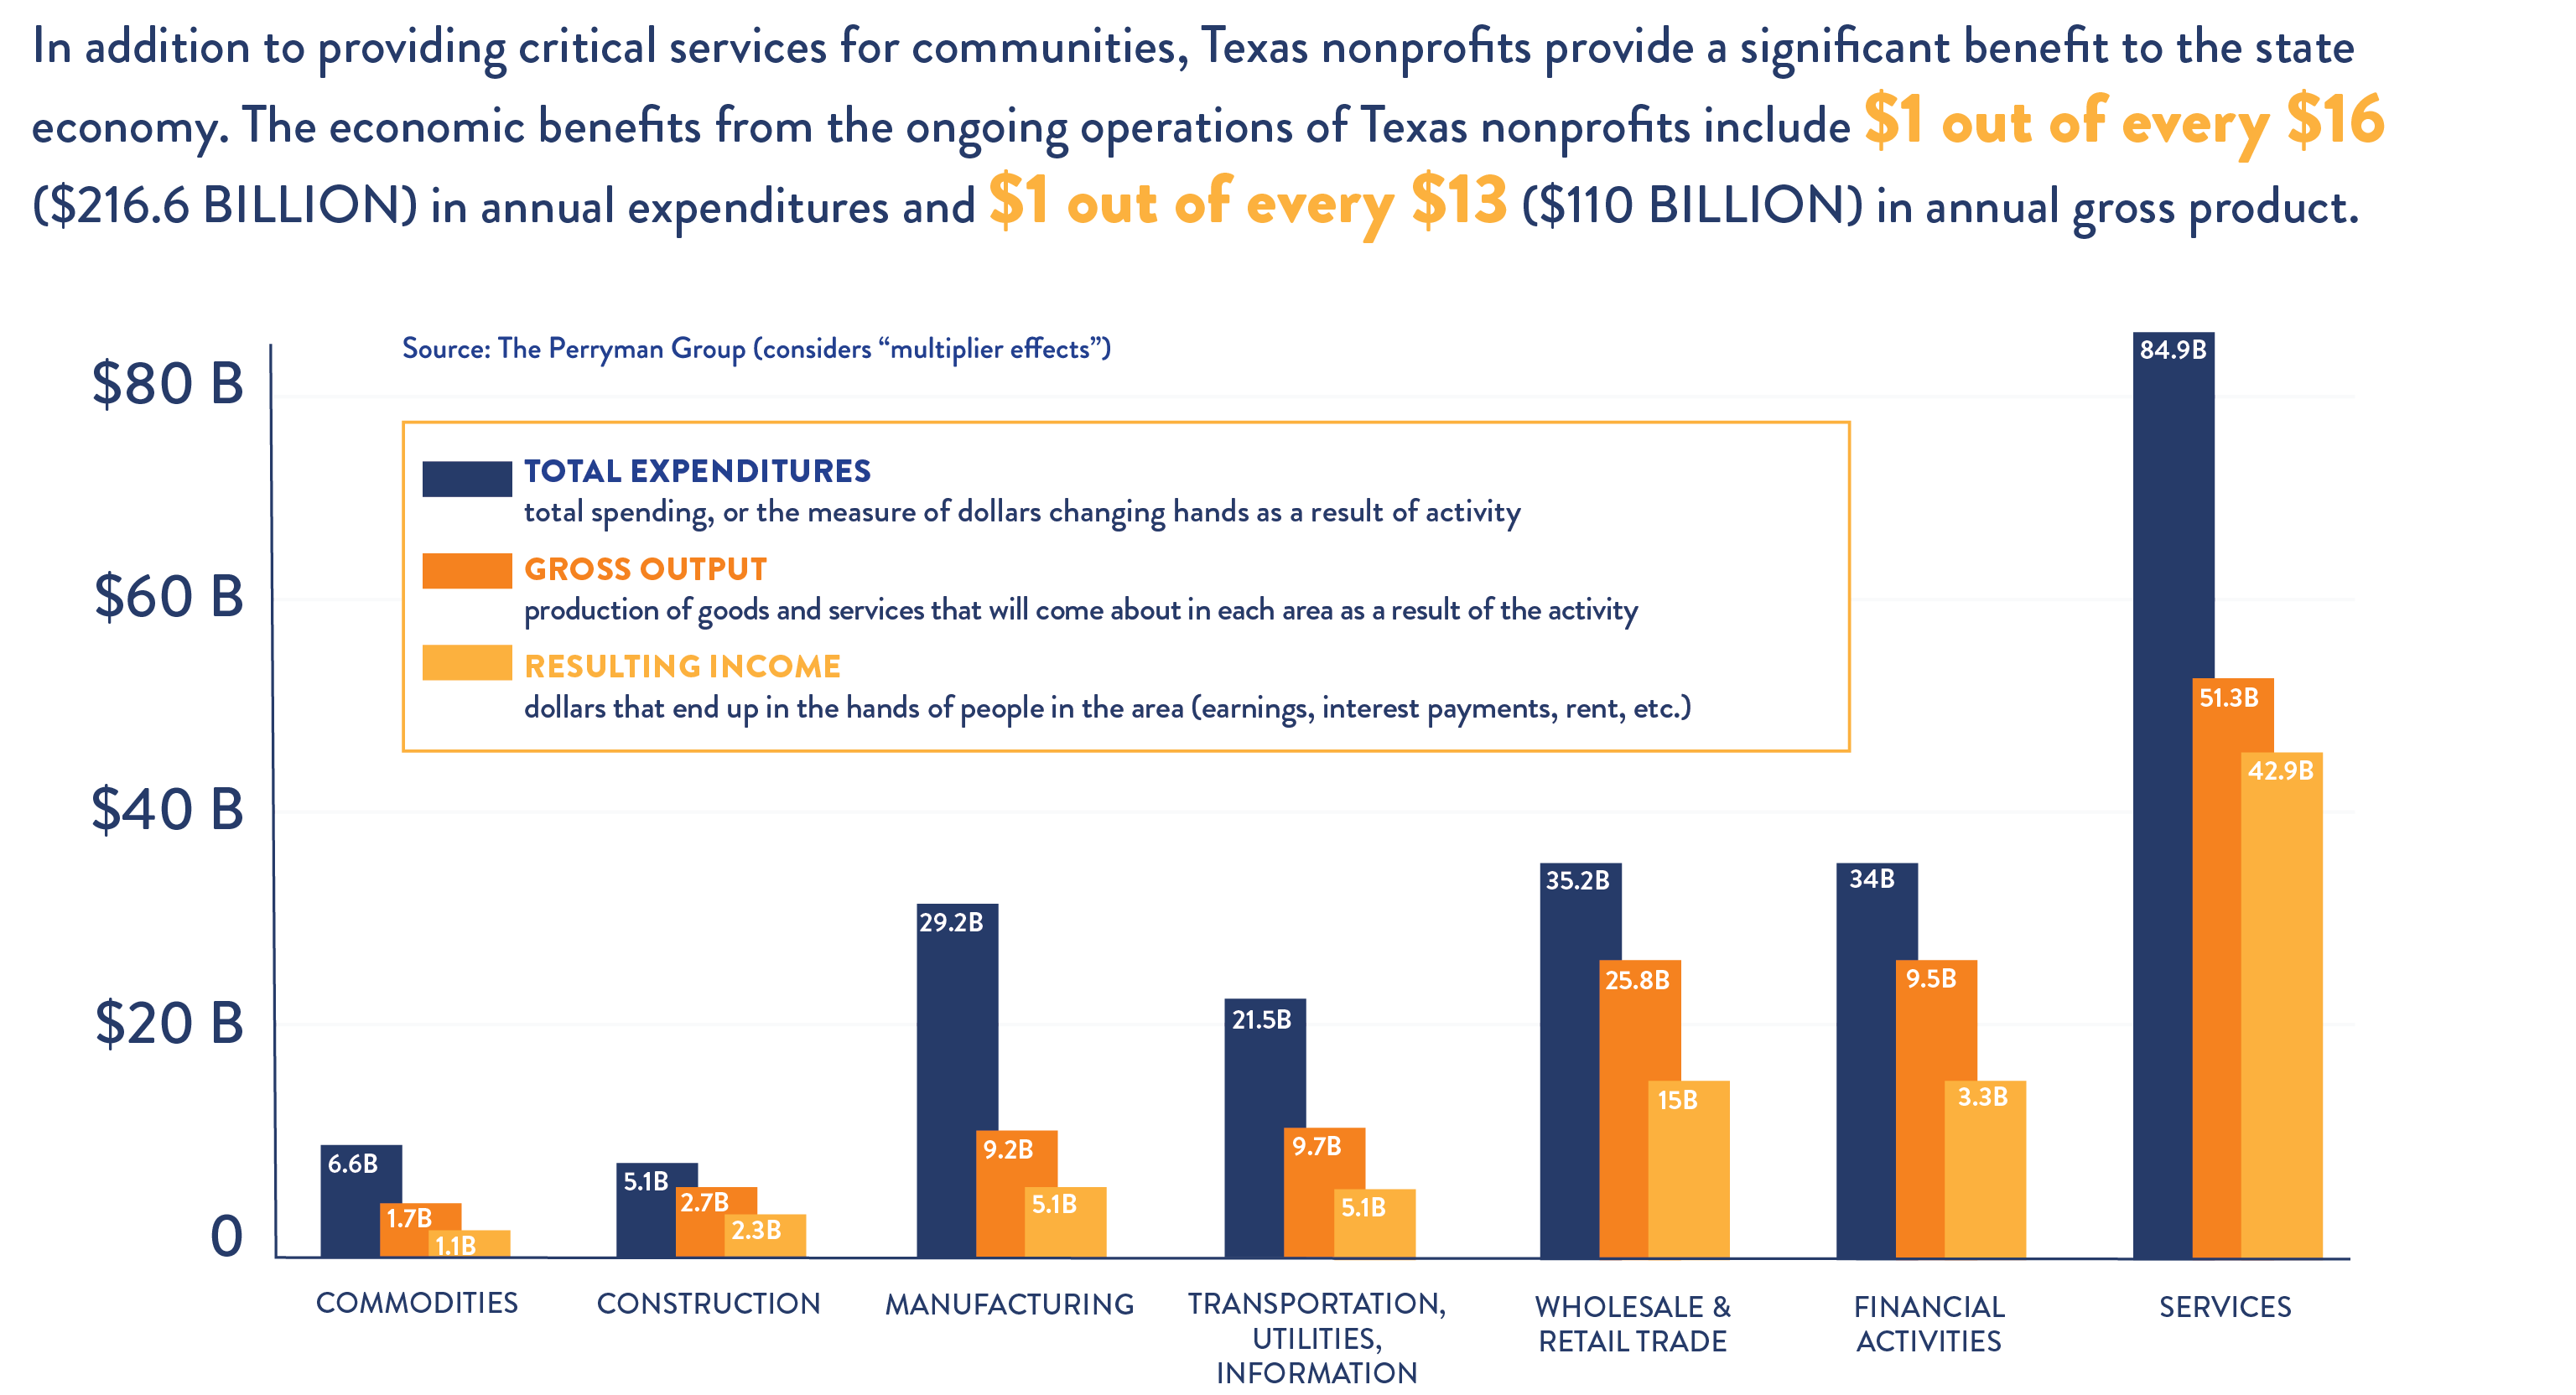 Economic Benefits from Texas Nonprofits by Industry